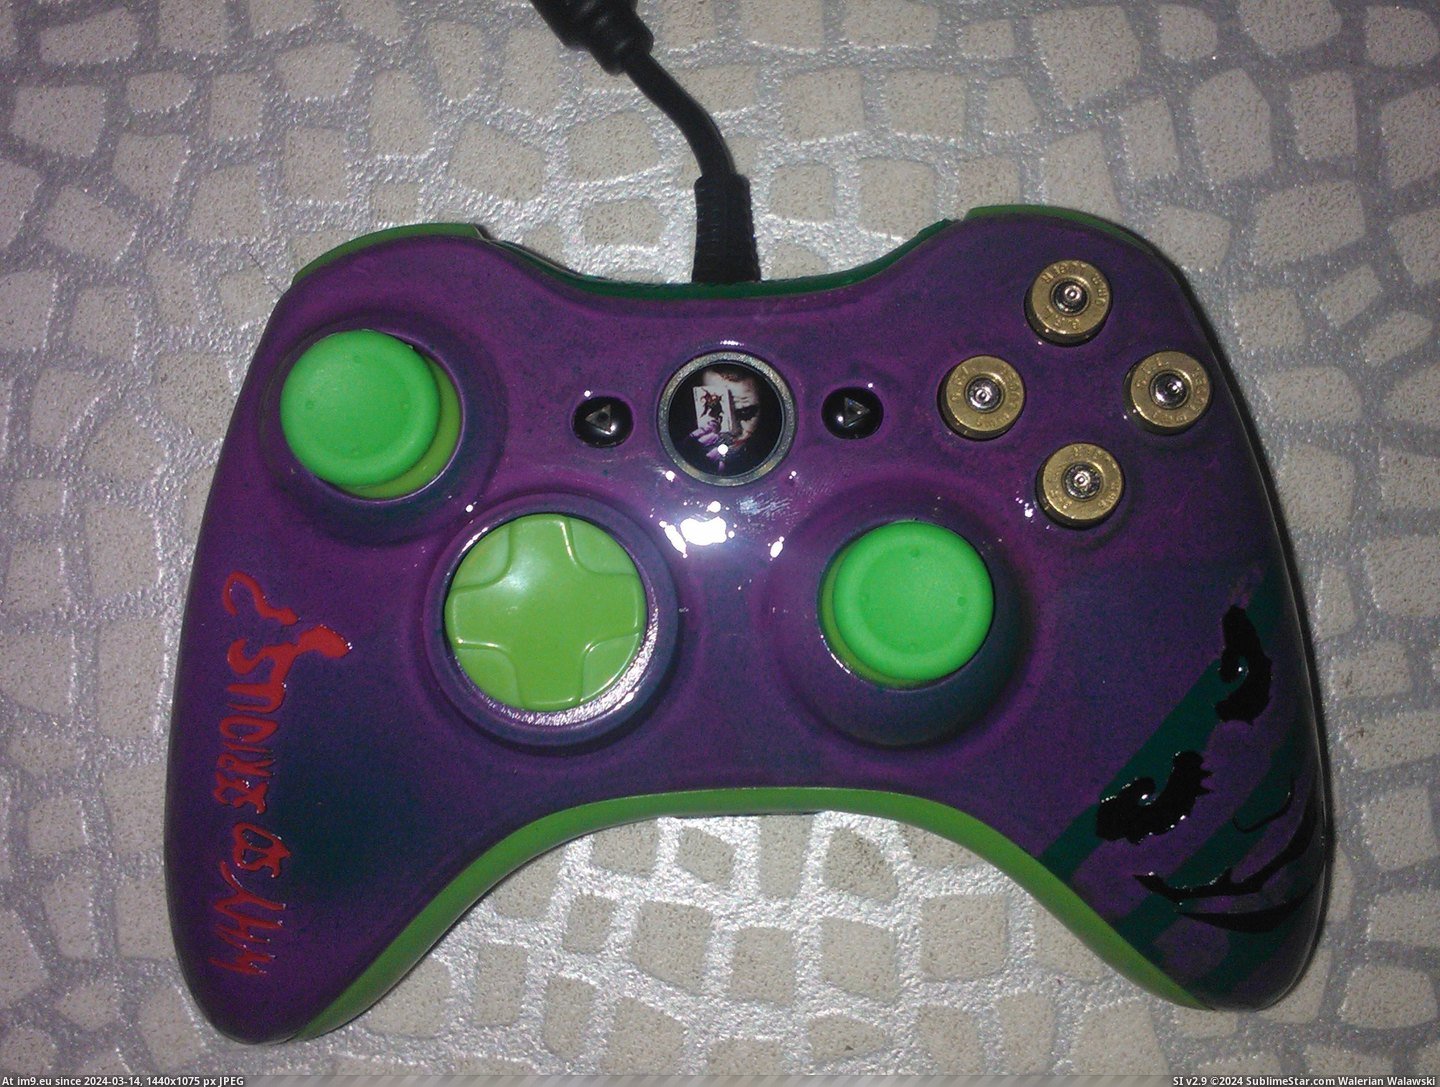 #Album #Gaming #Pretty #Law #Controllers #Brother #Cool #Xbox [Gaming] So my Brother in-law made some pretty cool custom xbox controllers [ALBUM] 6 Pic. (Image of album My r/GAMING favs))